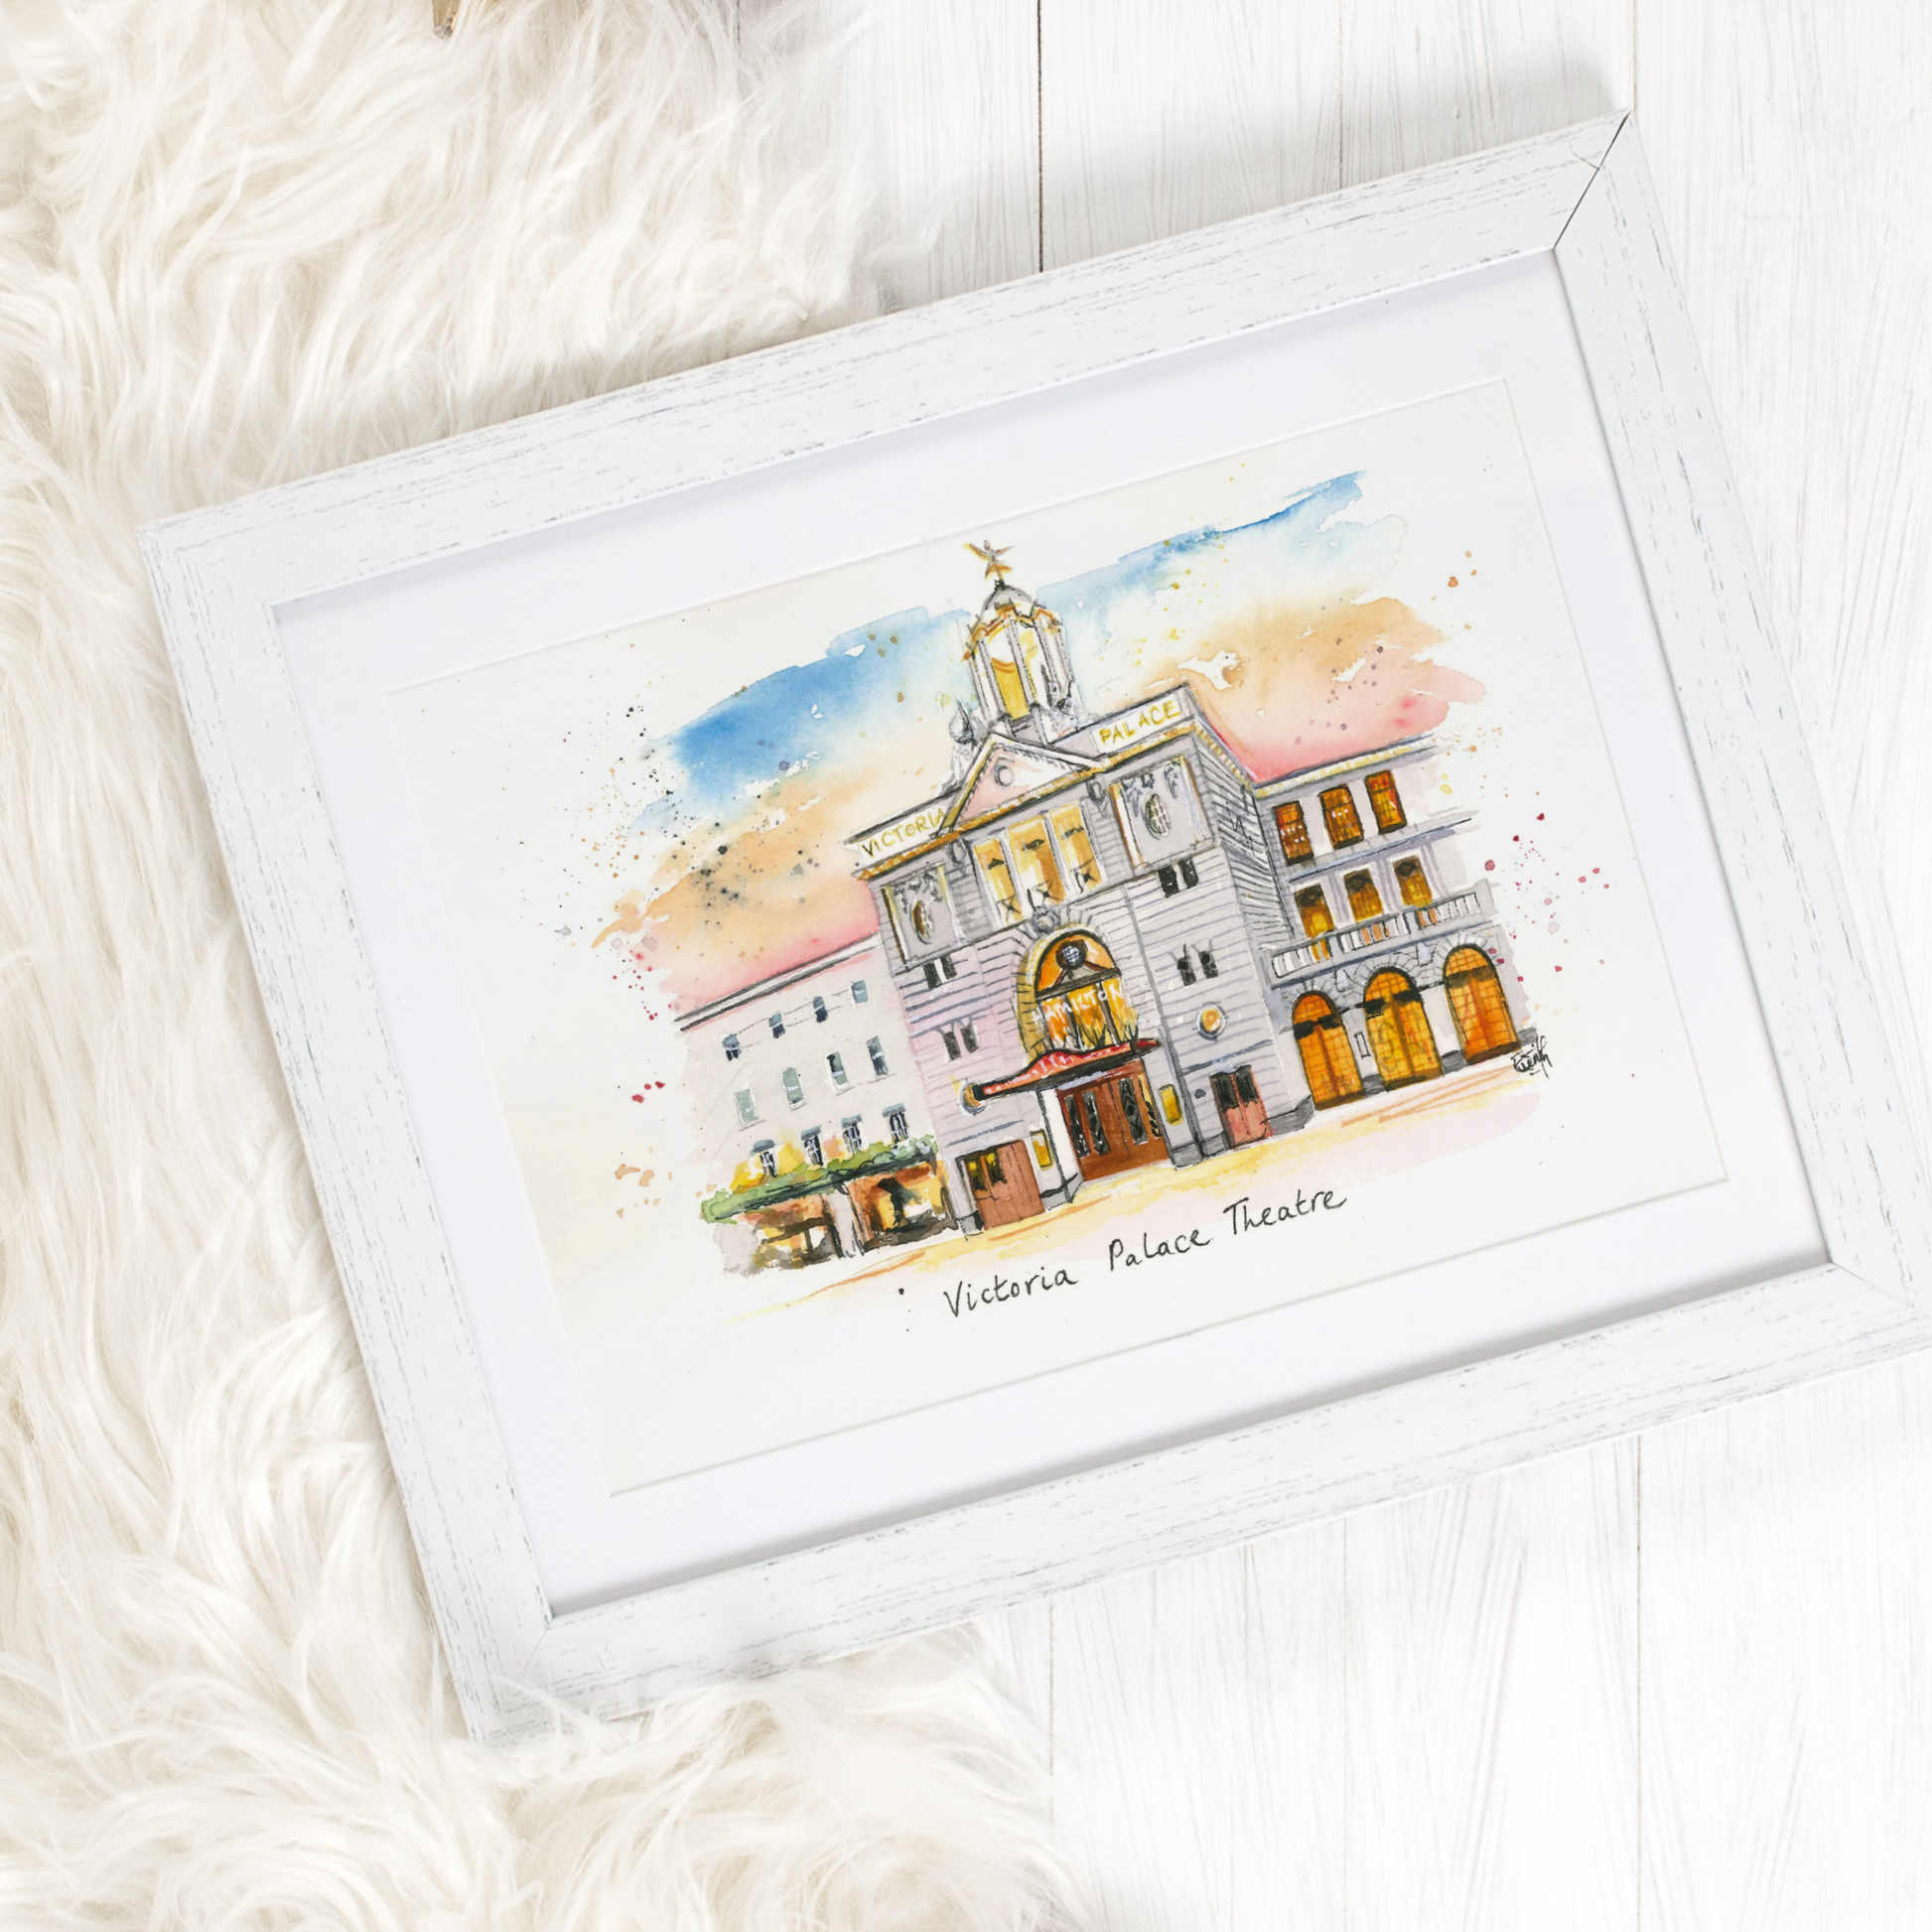 A framed watercolour print of the Victoria Palace Theatre, home to Hamilton the Musical, by local artist and performer, Eve Leoni Smith.